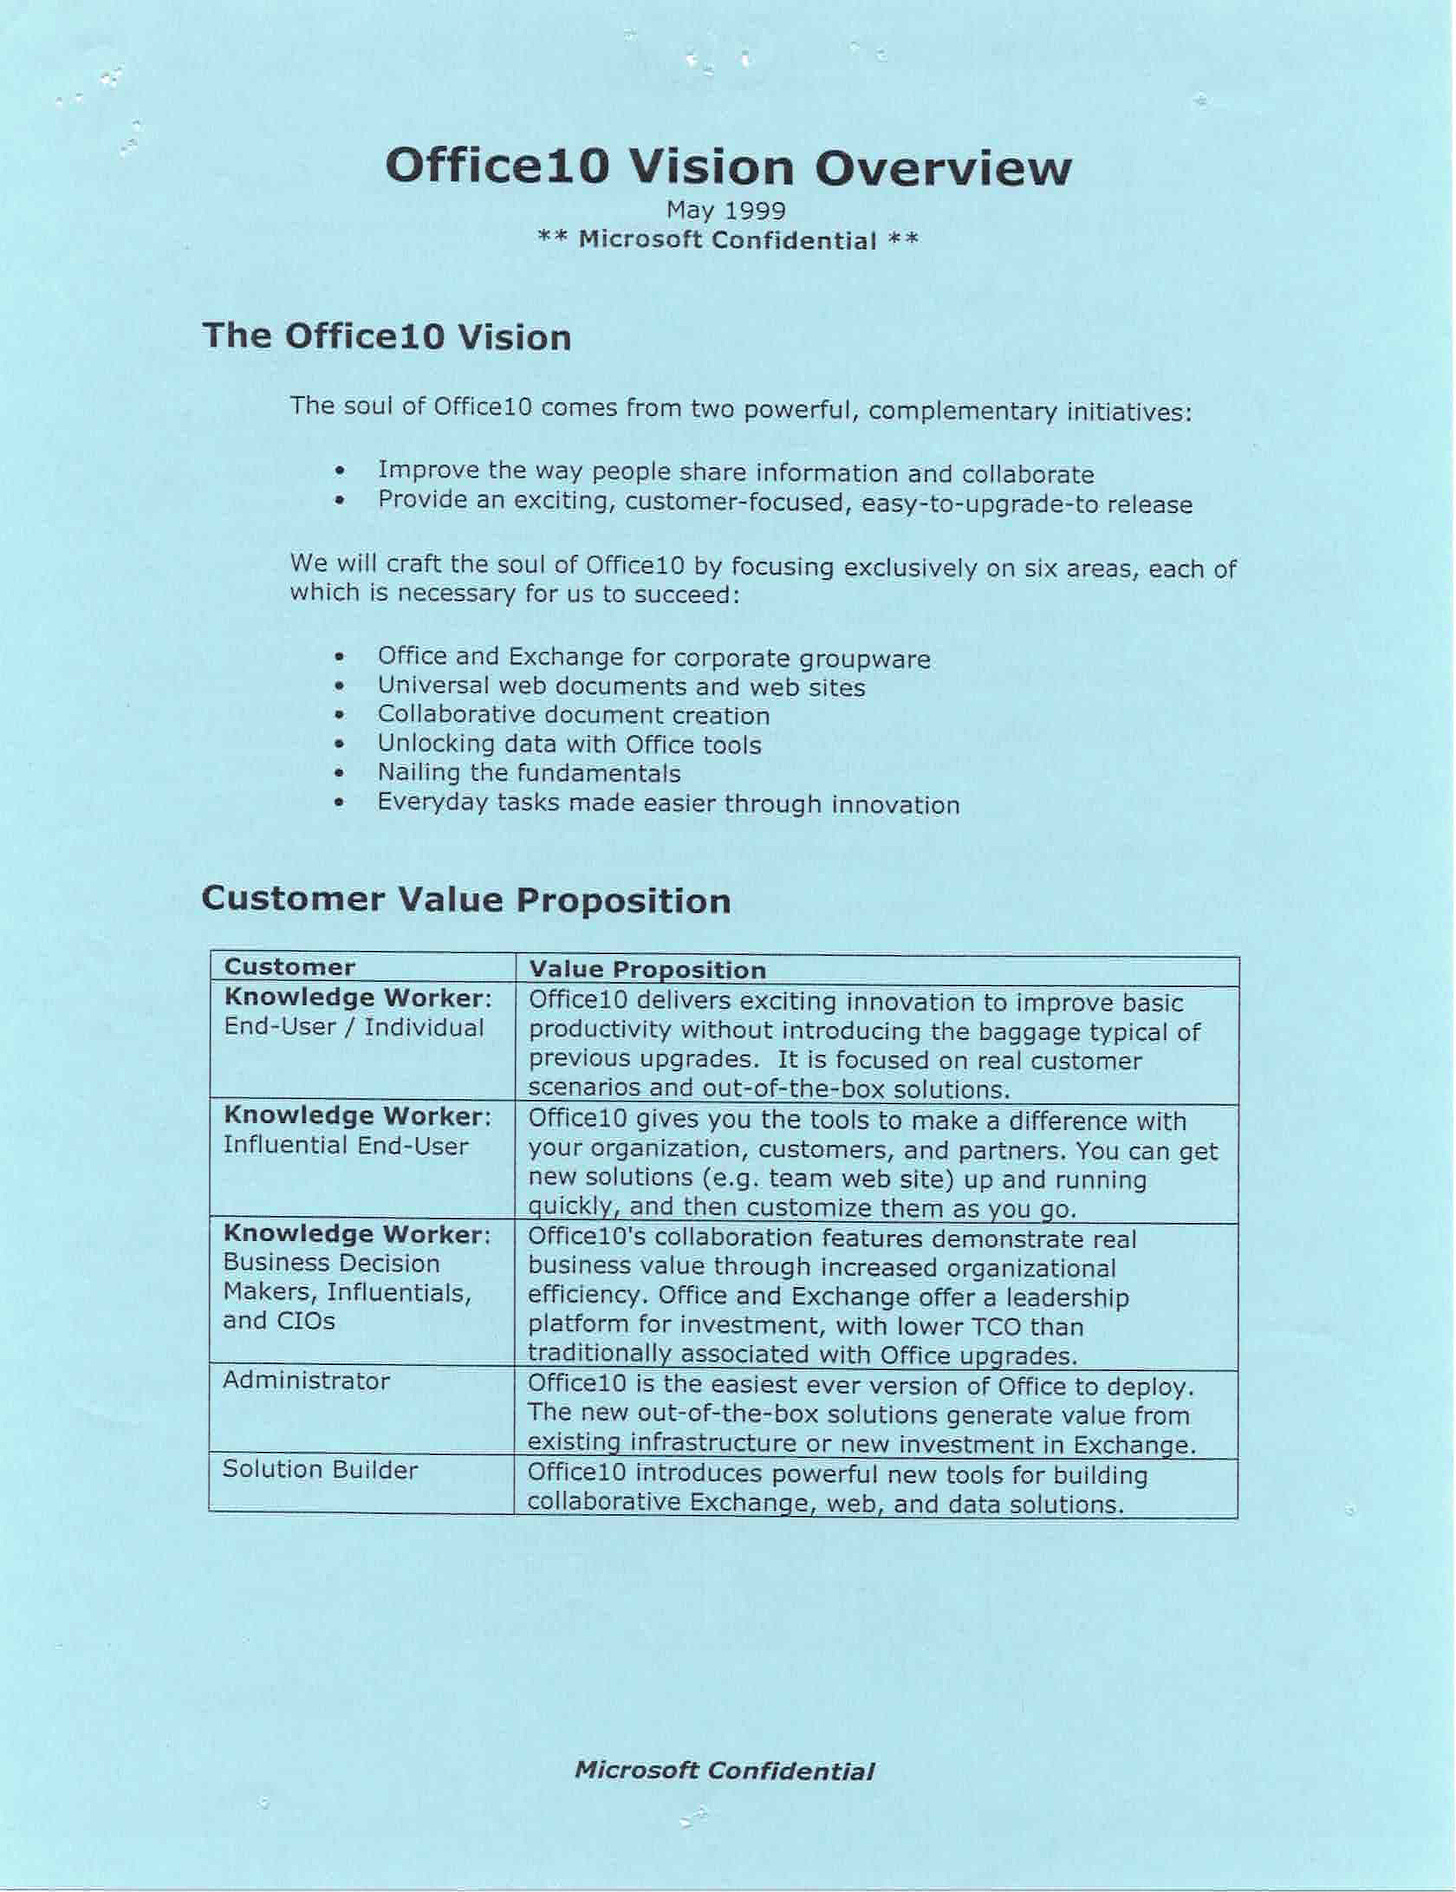 he goal of this document is to provide a playbook or battle plan, but not a recipe or feature list for Office10. As we select features, design, implement, and ultimately release the product, it is critical that each of you maintains the spirit of the vision. Like a football game or a battle, there are many situations and circumstances the vision fails to foresee, but this vision serves as a guide for what is important and should help each of you to make the right decisions. Office10 will be an expression of this vision that builds on the skills, creativity, and foresight of everyone on the team.  The Office10 Vision The soul of Office10 comes from two powerful and complementary initiatives:  Improve the way people share information and collaborate Provide an exciting, customer-focused, easy-to-upgrade-to release We will craft the soul of Office10 by focusing exclusively on six areas, each of which is necessary for us to succeed:  Office and Exchange for corporate groupware Universal web documents and web sites Collaborative document creation Unlocking data with Office tools Nailing the fundamentals Everyday tasks made easier through innovation We have a challenge in that these six focus areas not only span multiple teams, but also rely on each other for success. Full customer satisfaction depends on our ability to address the overlap in a clear and consistent manner.  Issues like choice of server, choice of browser, and ability to install without updating system components are challenges addressed by the tenets in this vision process.  Customer Value Proposition Office10 will be a leadership product because with our focus on real customer scenarios, we provide out-of-the-box solutions that exploit the technology we introduced with Office 2000. With Office 2000 we had a vision of how people will use the web in revolutionary new ways, working together in teams. With Office10, we will further deliver on that vision by eliminating the need for manually stitching it all together. Delivering an out-of-the-box experience is a key goal for Office10.  An out-of-the box experience is one that is directly accessible after installation, obviously applicable, easily discoverable, free of baggage that would prevent it from being used directly, and also easily customizable or adaptable by power users and IT professionals.   The way our customers work is changing for the better. In the digital future, information is available to the people who need it for their jobs, but not just by trickling down through the management structure. Workers have the tools to analyze data to make decisions. Meetings are reserved for decisions rather than status. People can work together in virtual teams regardless of time and space constraints. Work is more fun because you focus more on the content and less on the tools or processes holding you back. The work we do in Office10 makes this all possible. We should not take for granted the way we use technology at Microsoft and how that is having a profound effect on our own business: email as the backbone of communications, continually updated team web sites, the web as a tool for closer contact with our customers and partners, and open access to data for everyone (MS Sales, Raid). This is the type of return on investment that excites our customers. But as cool as http://officeweb and other Microsoft sites are, our customers cannot easily build them. We must also account for varying cultures that affect the way companies want to structure their collaboration. Office10 provides the products they need to exploit new technologies for new ways of communicating and collaborating.  Changes like this take time, often requiring shifts in culture. We expect people will want to test the waters before diving in to these new ways to work or betting on new server infrastructure. That is why nailing the upgrade fundamentals is also a requirement for Office10. This release does not require new hardware. Of course, the file formats remain compatible. A significant new customer-focused advance is that we do not require companies to test all of their other software for conflicts due to required system file updates–it is hard enough just keeping a single machine running through software upgrades, imagine having to upgrade thousands! Office10 takes the traditional negatives associated with an upgrade and turn them into positives, i.e. we claim performance, deployment, and stability as demonstrable strengths. We have features to back this up, e.g. if the product crashes, data is saved and there are built-in tools to report and help resolve the situation. The end-user excitement features we add are all aimed at mainstream authoring scenarios, involving innovations like web hosting and voice and/or addressing specific customer complaints such as over-aggressive auto-behavior. We generate applause at user groups because we combine innovation with the features they use every day. We generate applause at deployment conferences because we avoid unnecessary barriers to upgrade.  Customer  Value Proposition  Knowledge Worker: End-User / Individual  Office10 addresses common issues and increases basic productivity without introducing the baggage typical of previous upgrades. At the same time, it offers the promise of exciting new ways to work, and lots of useful, usable, and desirable features for Walt Mossberg to write about in his Wall Street Journal column.  Knowledge Worker: Influential End-User  Office10 gives you the tools to make a difference–with your organization, customers, and partners. You can get new solutions (e.g. a team web site) up and running quickly, and then introduce powerful customizations as you go. Our power users and early adopters cannot wait to roll it out so they can start to improve the efficiency of their workgroup!  Knowledge Worker: Business Decision Maker, Influential, and CIO  Office10's end-to-end solutions and collaboration features demonstrate real business value through increased organization efficiency. Office together with Exchange offers a leadership platform for investment. All of this comes at a lower cost than traditionally associated with Office upgrades. Our sales force has a response to groupware development. Tom Austin has something positive to say about our strategy in his Gartner Group reports.  Administrator  Office10 is the easiest ever version of Office to deploy. New deployment features, no new system DLLs, and performance and stability work all make Office10 a smooth upgrade. The new out-of-the-box solutions generate value from existing infrastructure, or a new investment in Exchange. Our OAC members continue to tell us we have listened to their input and made their lives significantly easier.  Solution Builder  Office10 introduces powerful new tools for building collaborative solutions on top of Exchange, as well as enhancements to the tools for other forms of web solutions and collaboration. You can easily start by customizing the out-of-the-box solutions, providing customization to solve specific customer business problems. Our developers and solutions providers, and Notes VARs, are excited to use Office10!